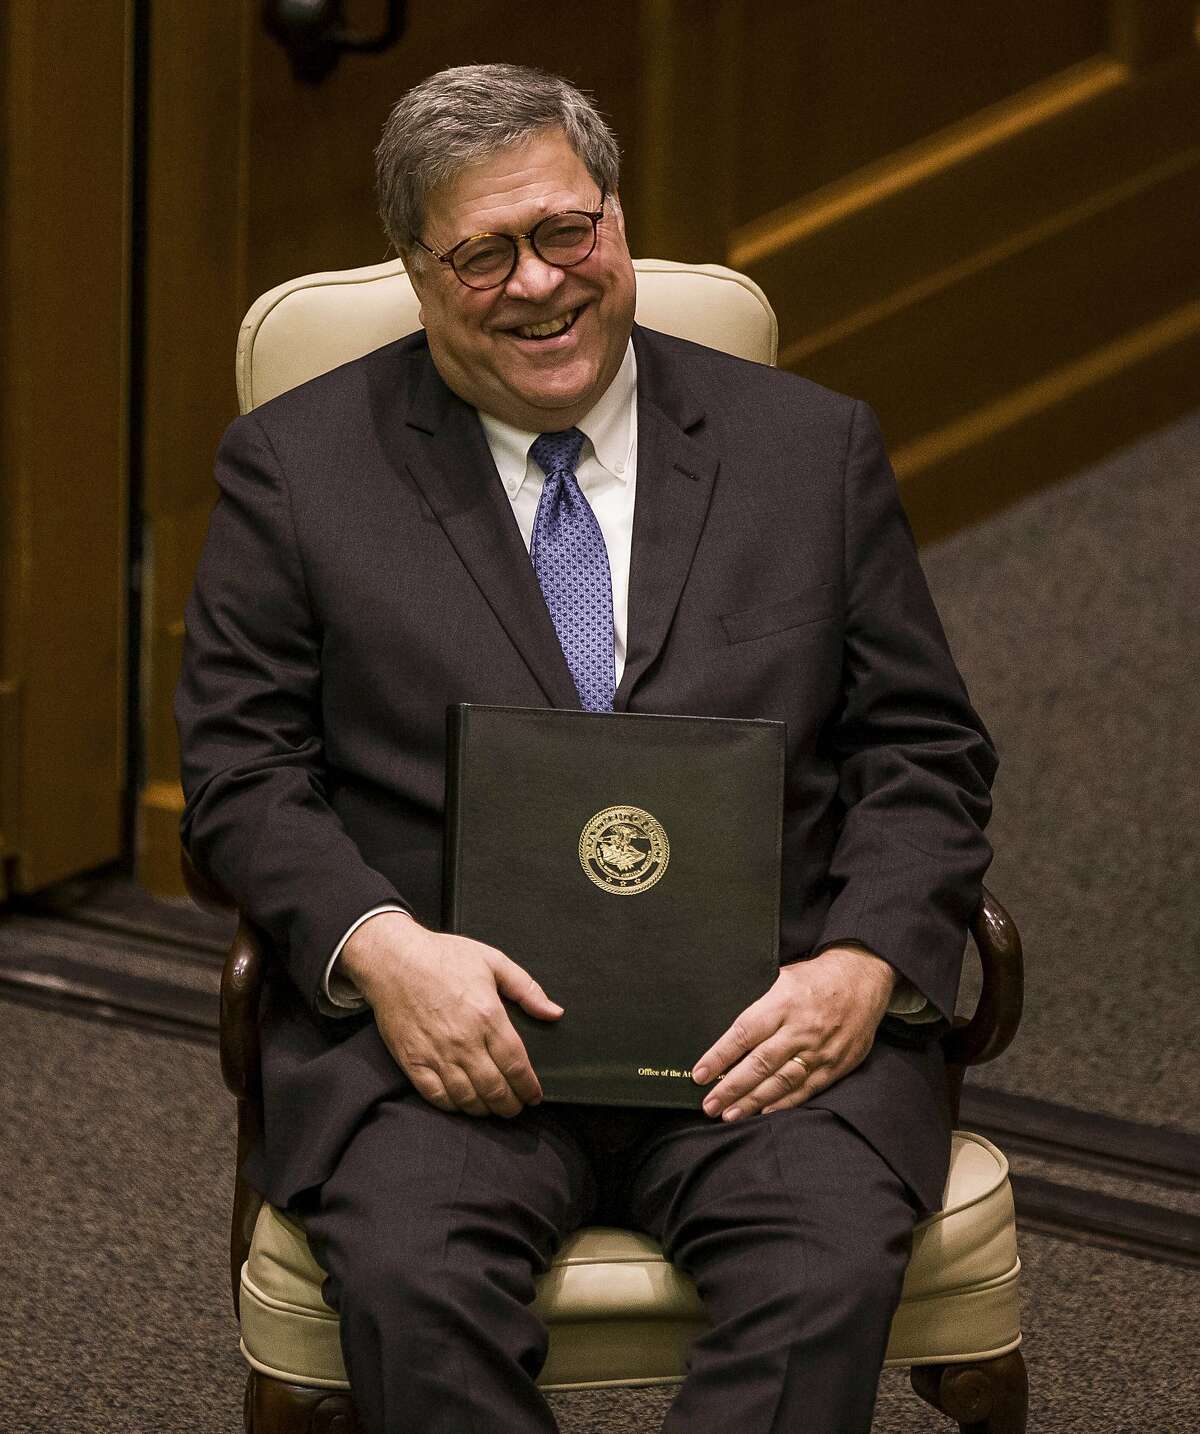 United States Attorney General William P. Barr laughs as he introduced for a speaking event for Notre Dame Law School students and faculty on Friday, Oct. 11, 2019, inside Notre Dame's Eck Hall of Law in South Bend, Ind. (Robert Franklin/South Bend Tribune via AP)